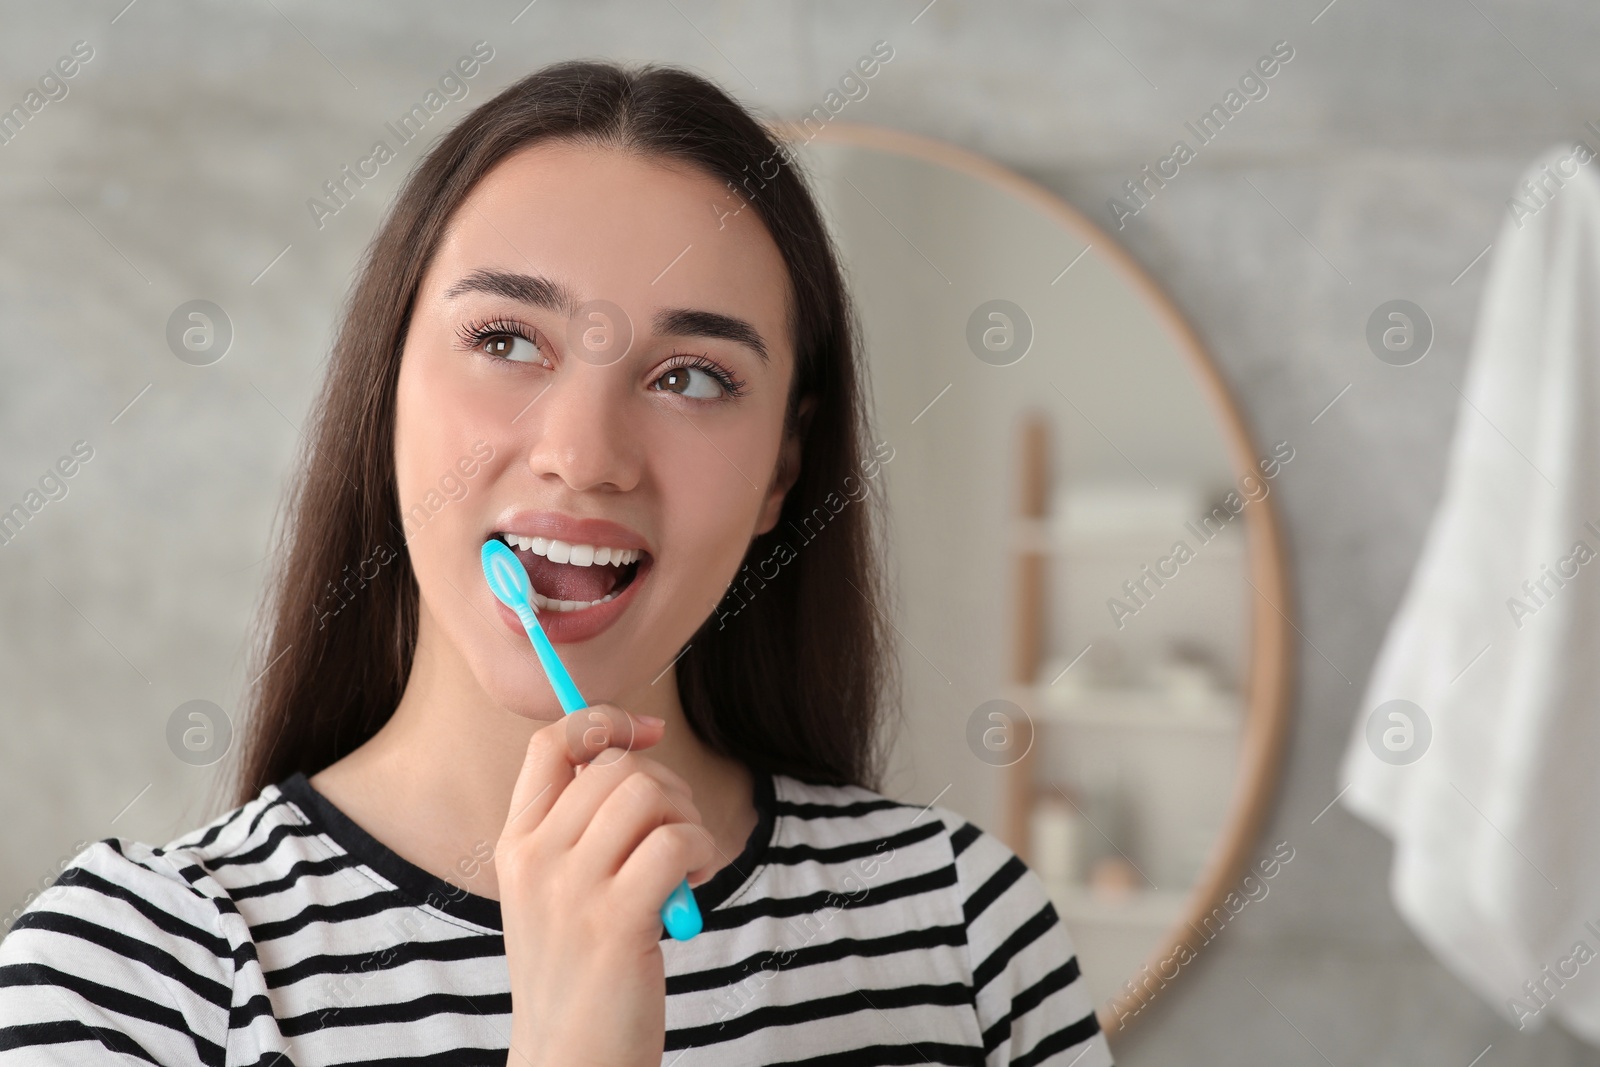 Photo of Young woman brushing her teeth with plastic toothbrush in bathroom